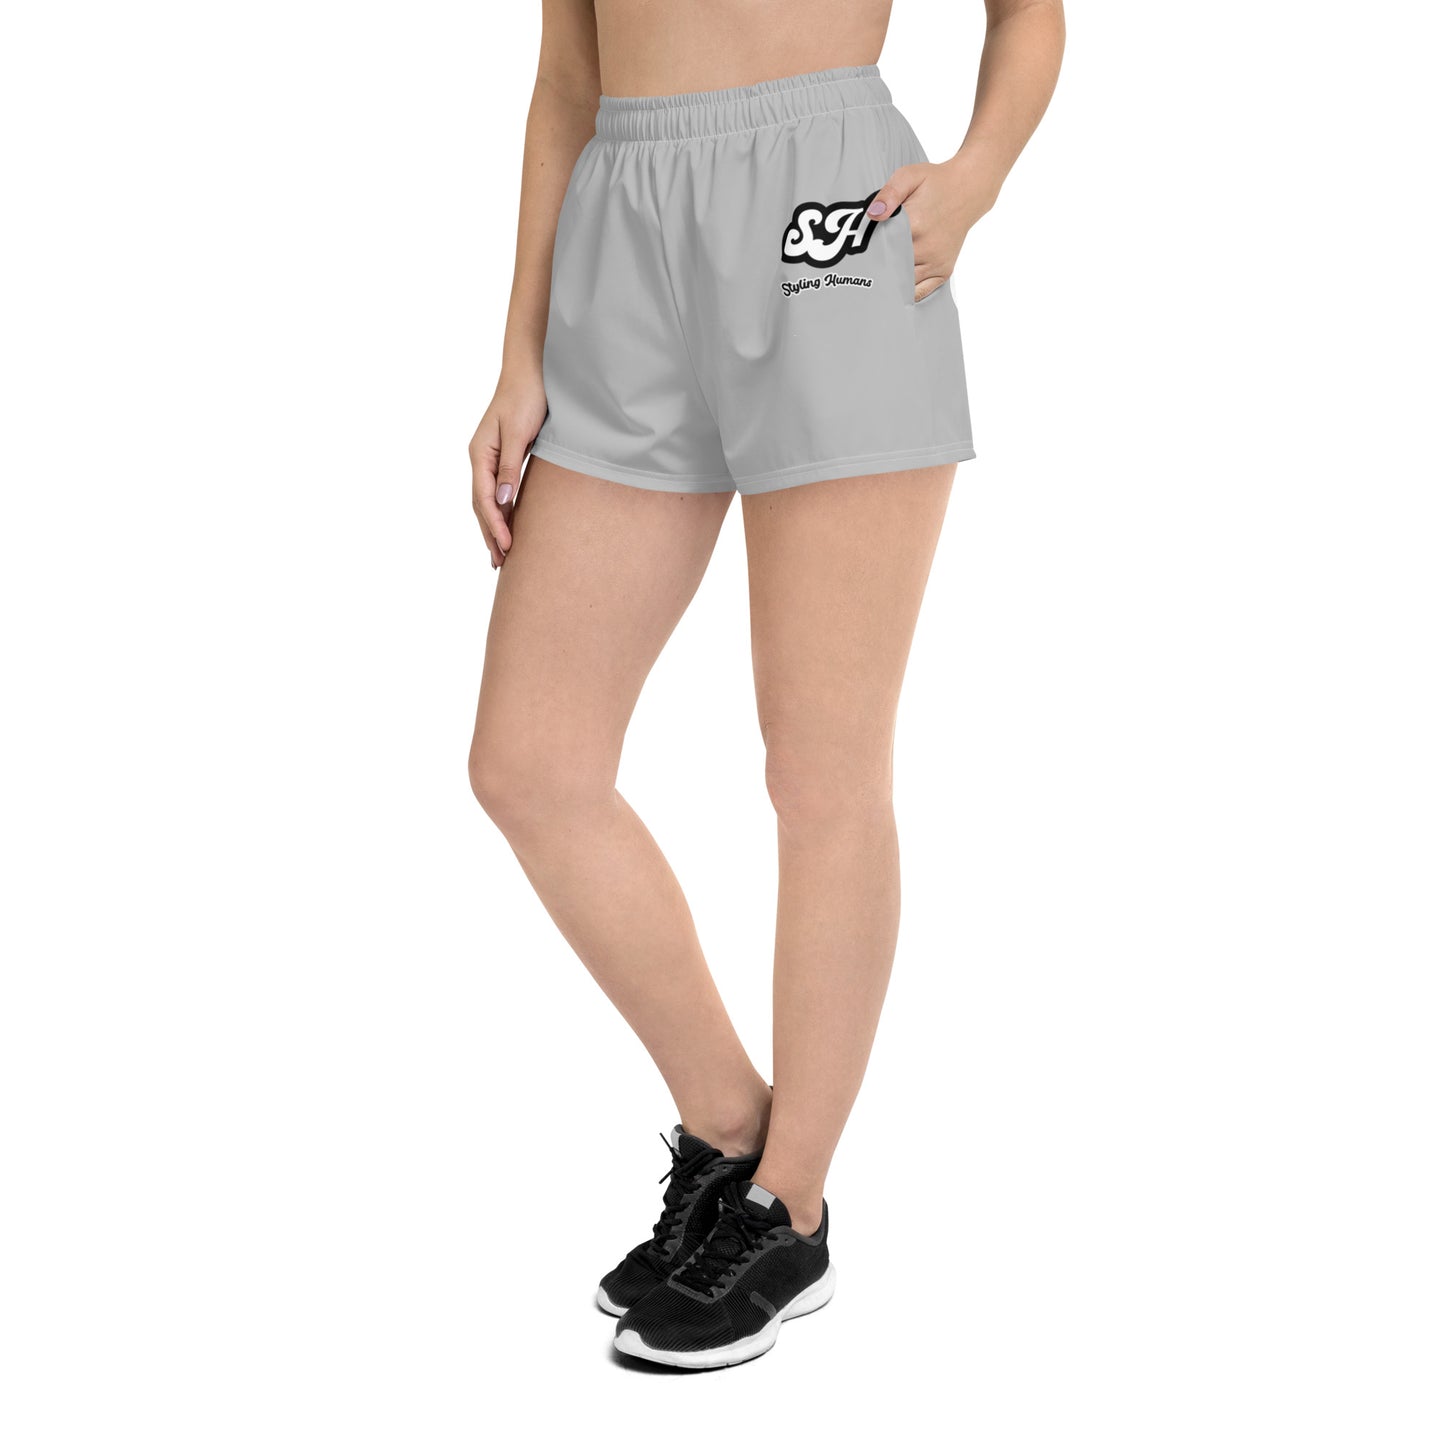 Sheè Cozy Girl Women’s Silver Recycled Athletic Shorts